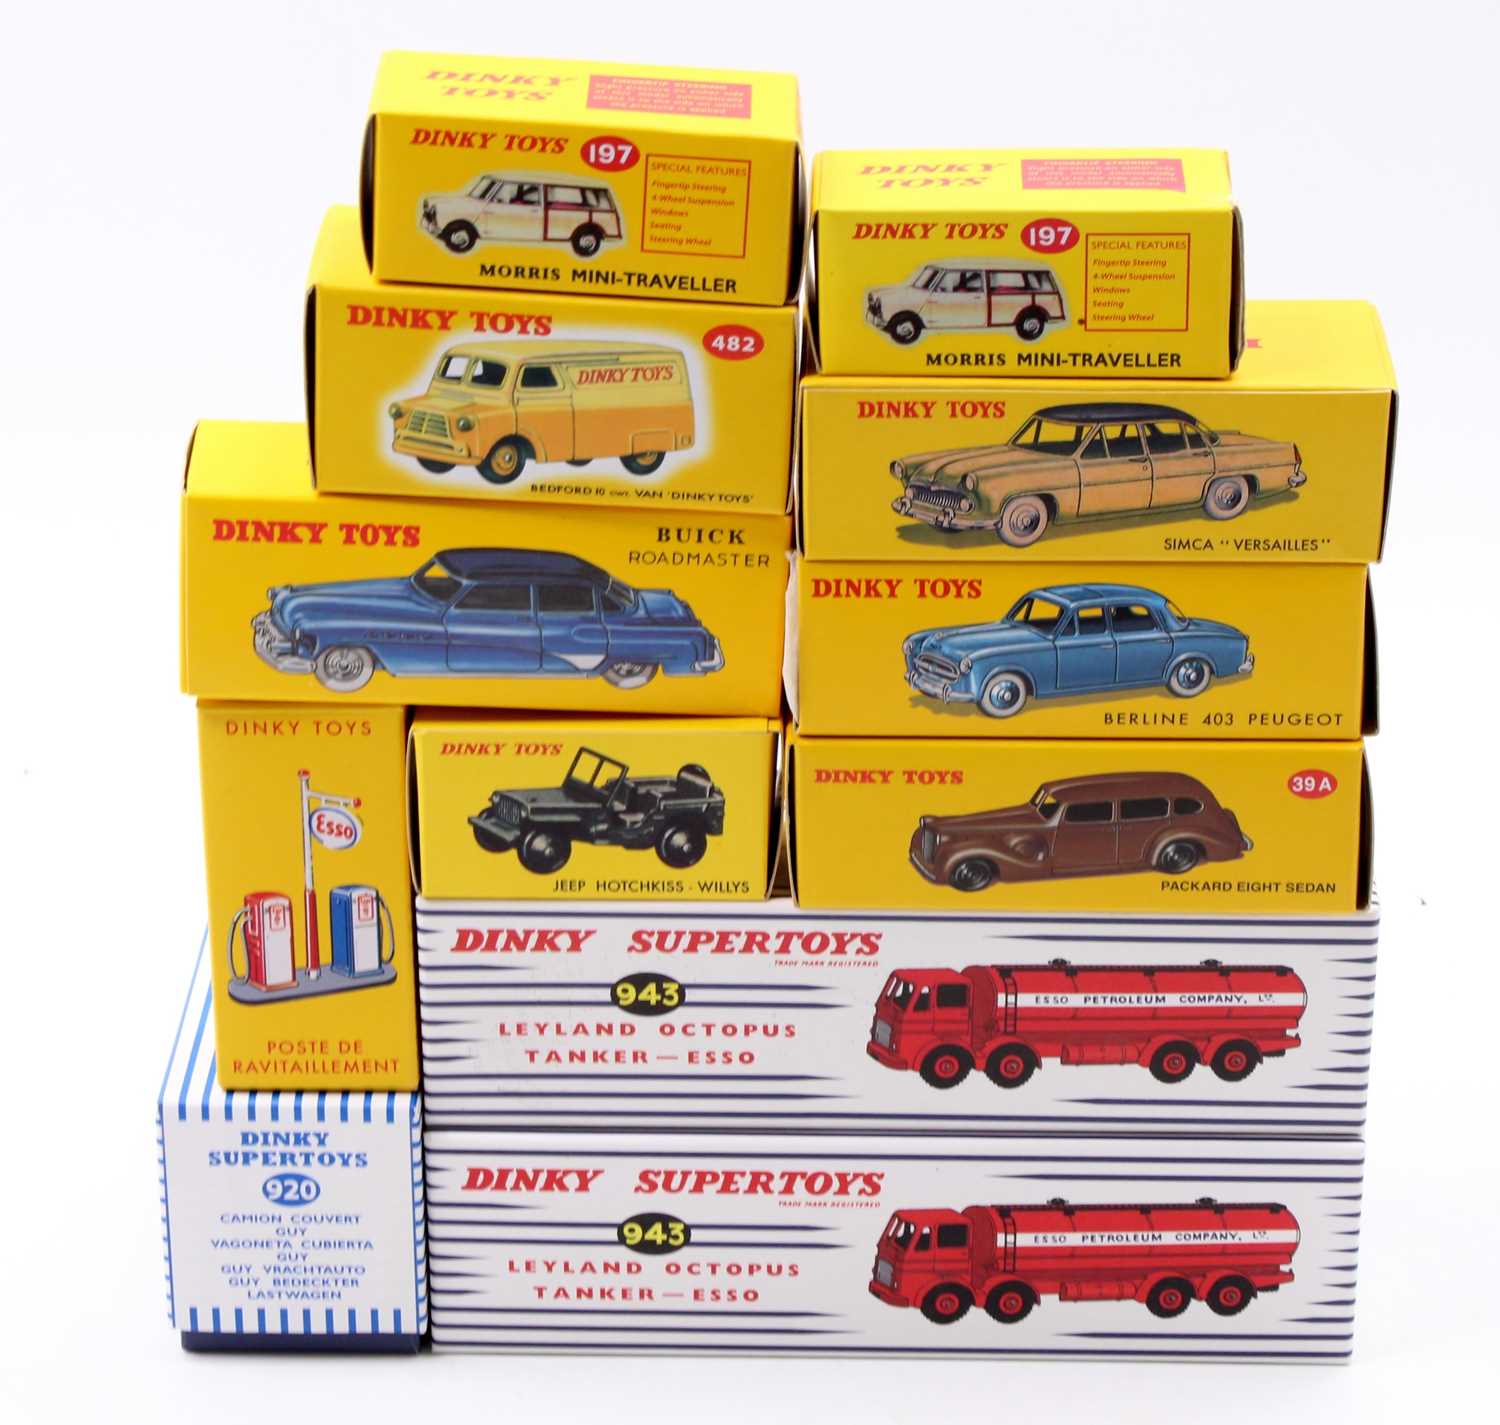 12 boxed Dinky Toys Atlas Editions modern issue diecasts, with examples including No. 943 Leyland